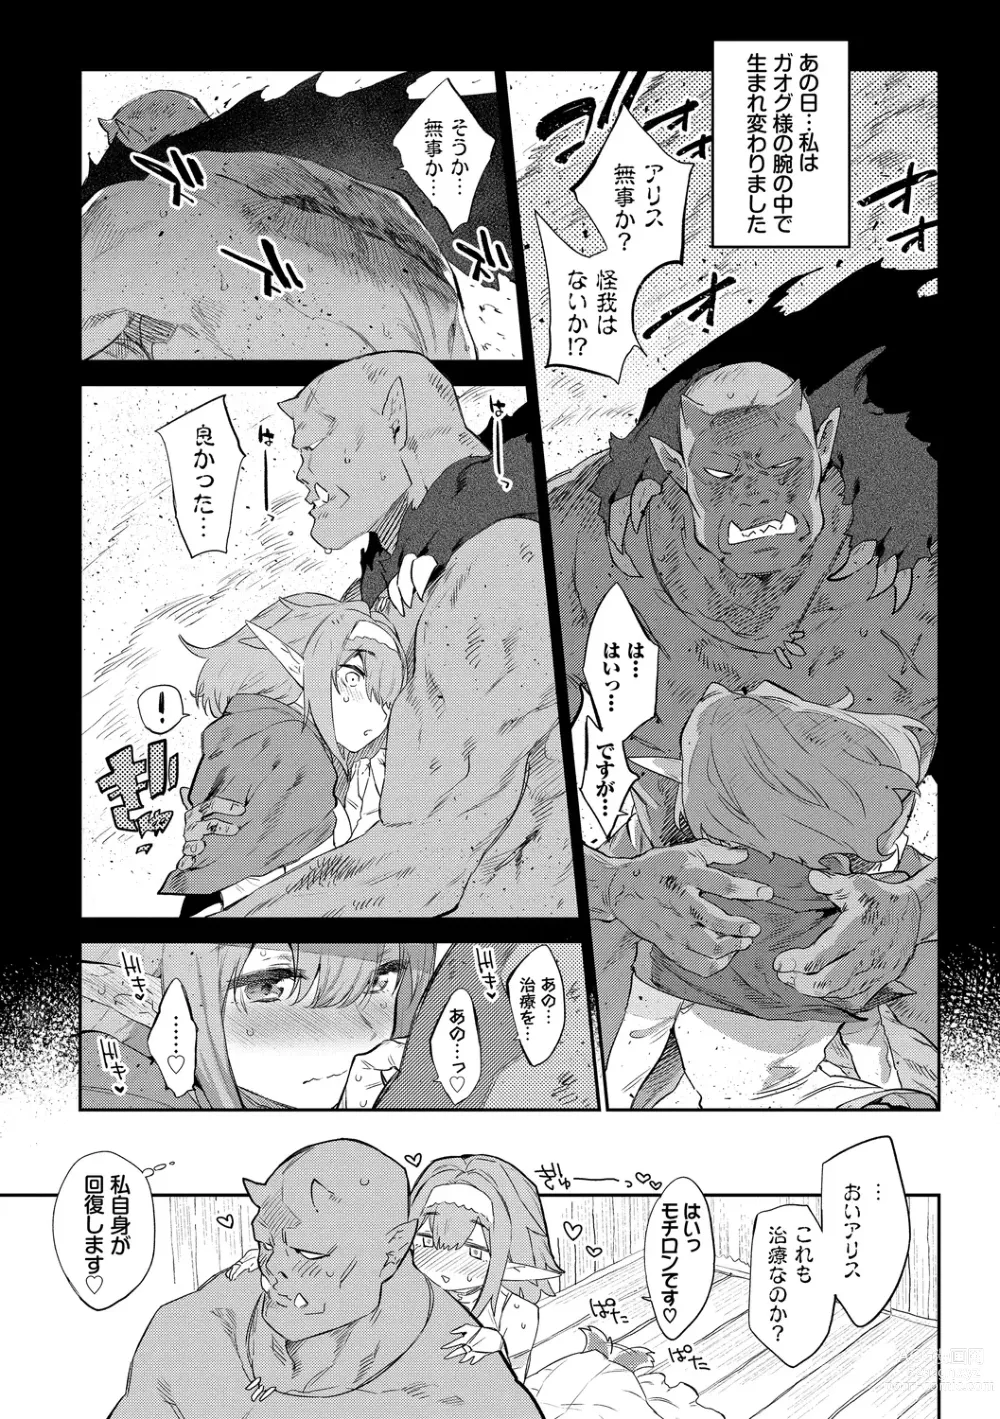 Page 7 of manga Ihou no Otome - Monster Girls in Another World